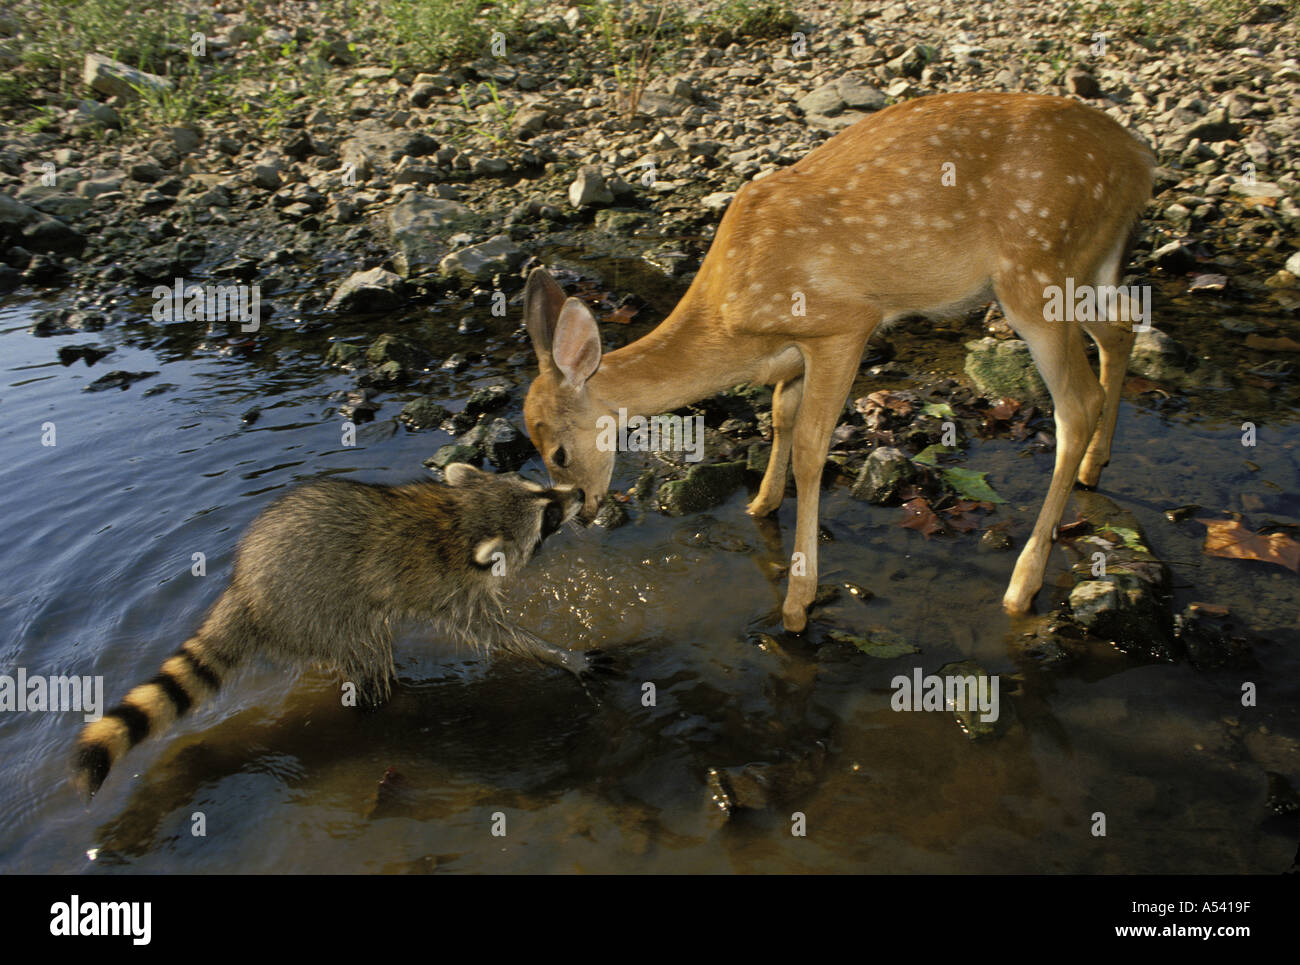 Ouch: Raccoon (Procione lotor) in creek morsi White-Tailed Deer Fawn sul naso (2a in serie), Missouri USA Foto Stock